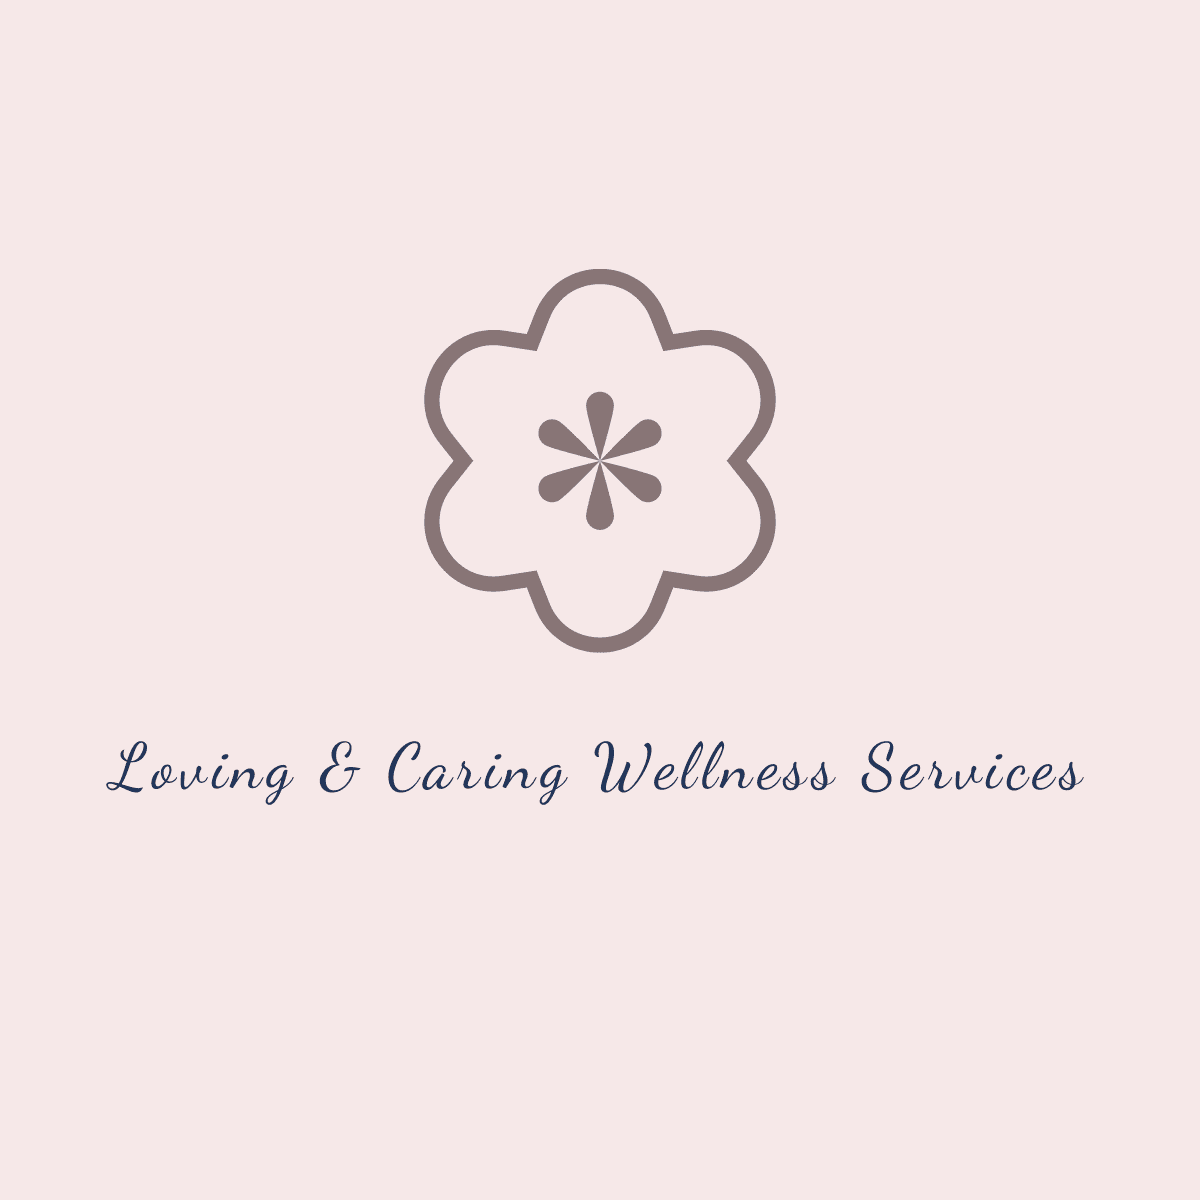 Loving & Caring Wellness Services